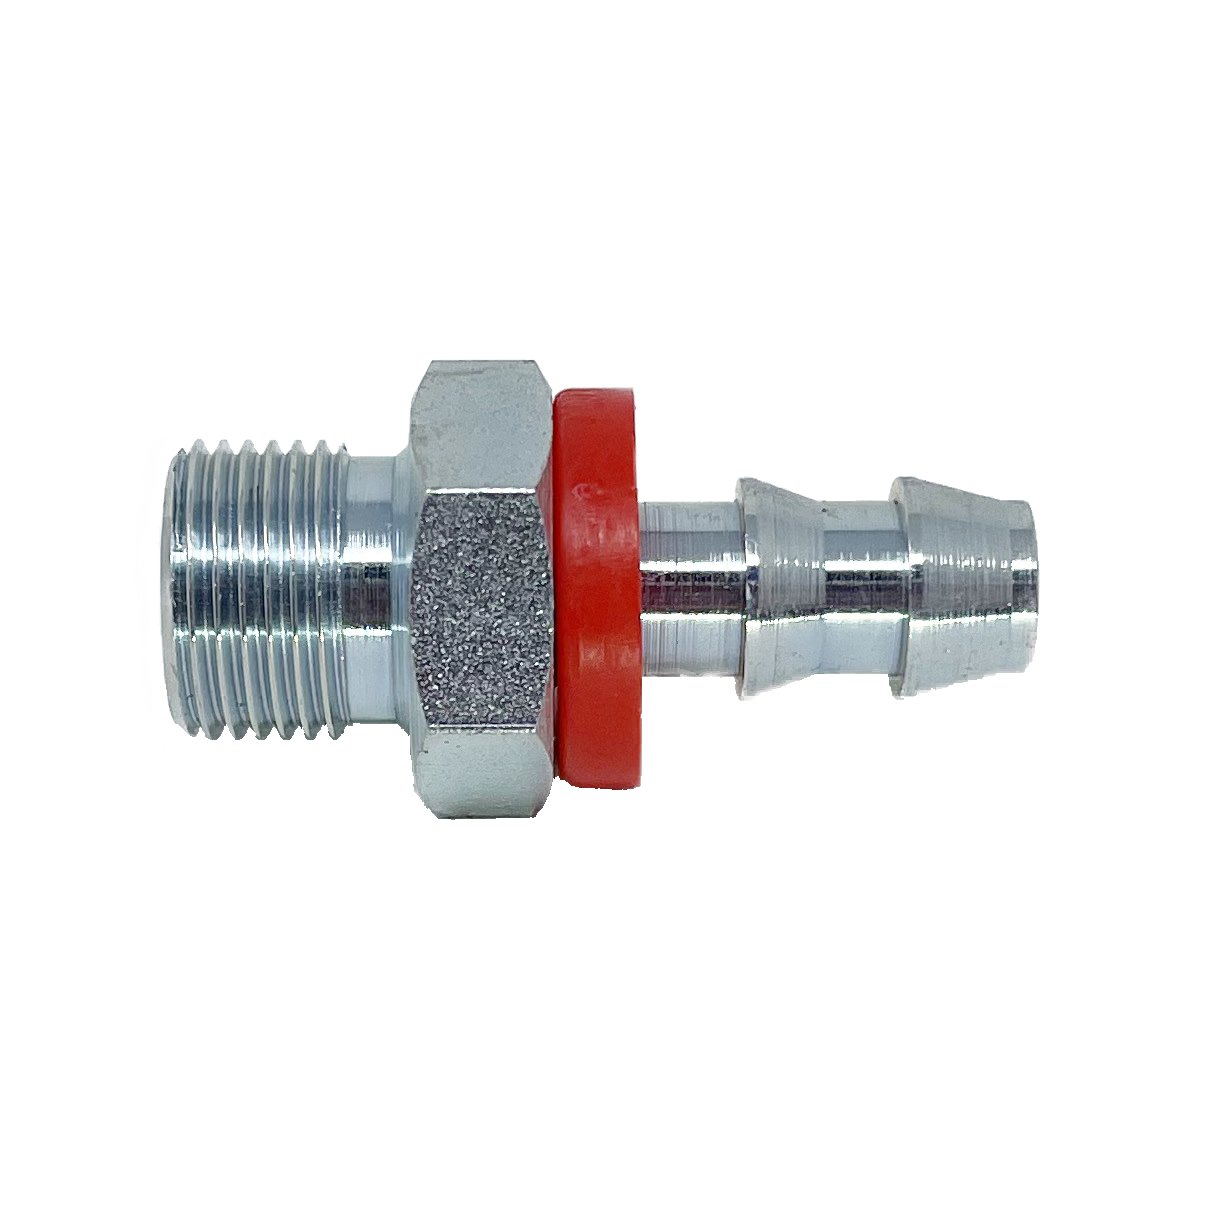 9920-04-04 : Adaptall Straight Adapter, Male 0.25 (1/4") BSPP x 0.25 (1/4") Hose Barb, Carbon Steel